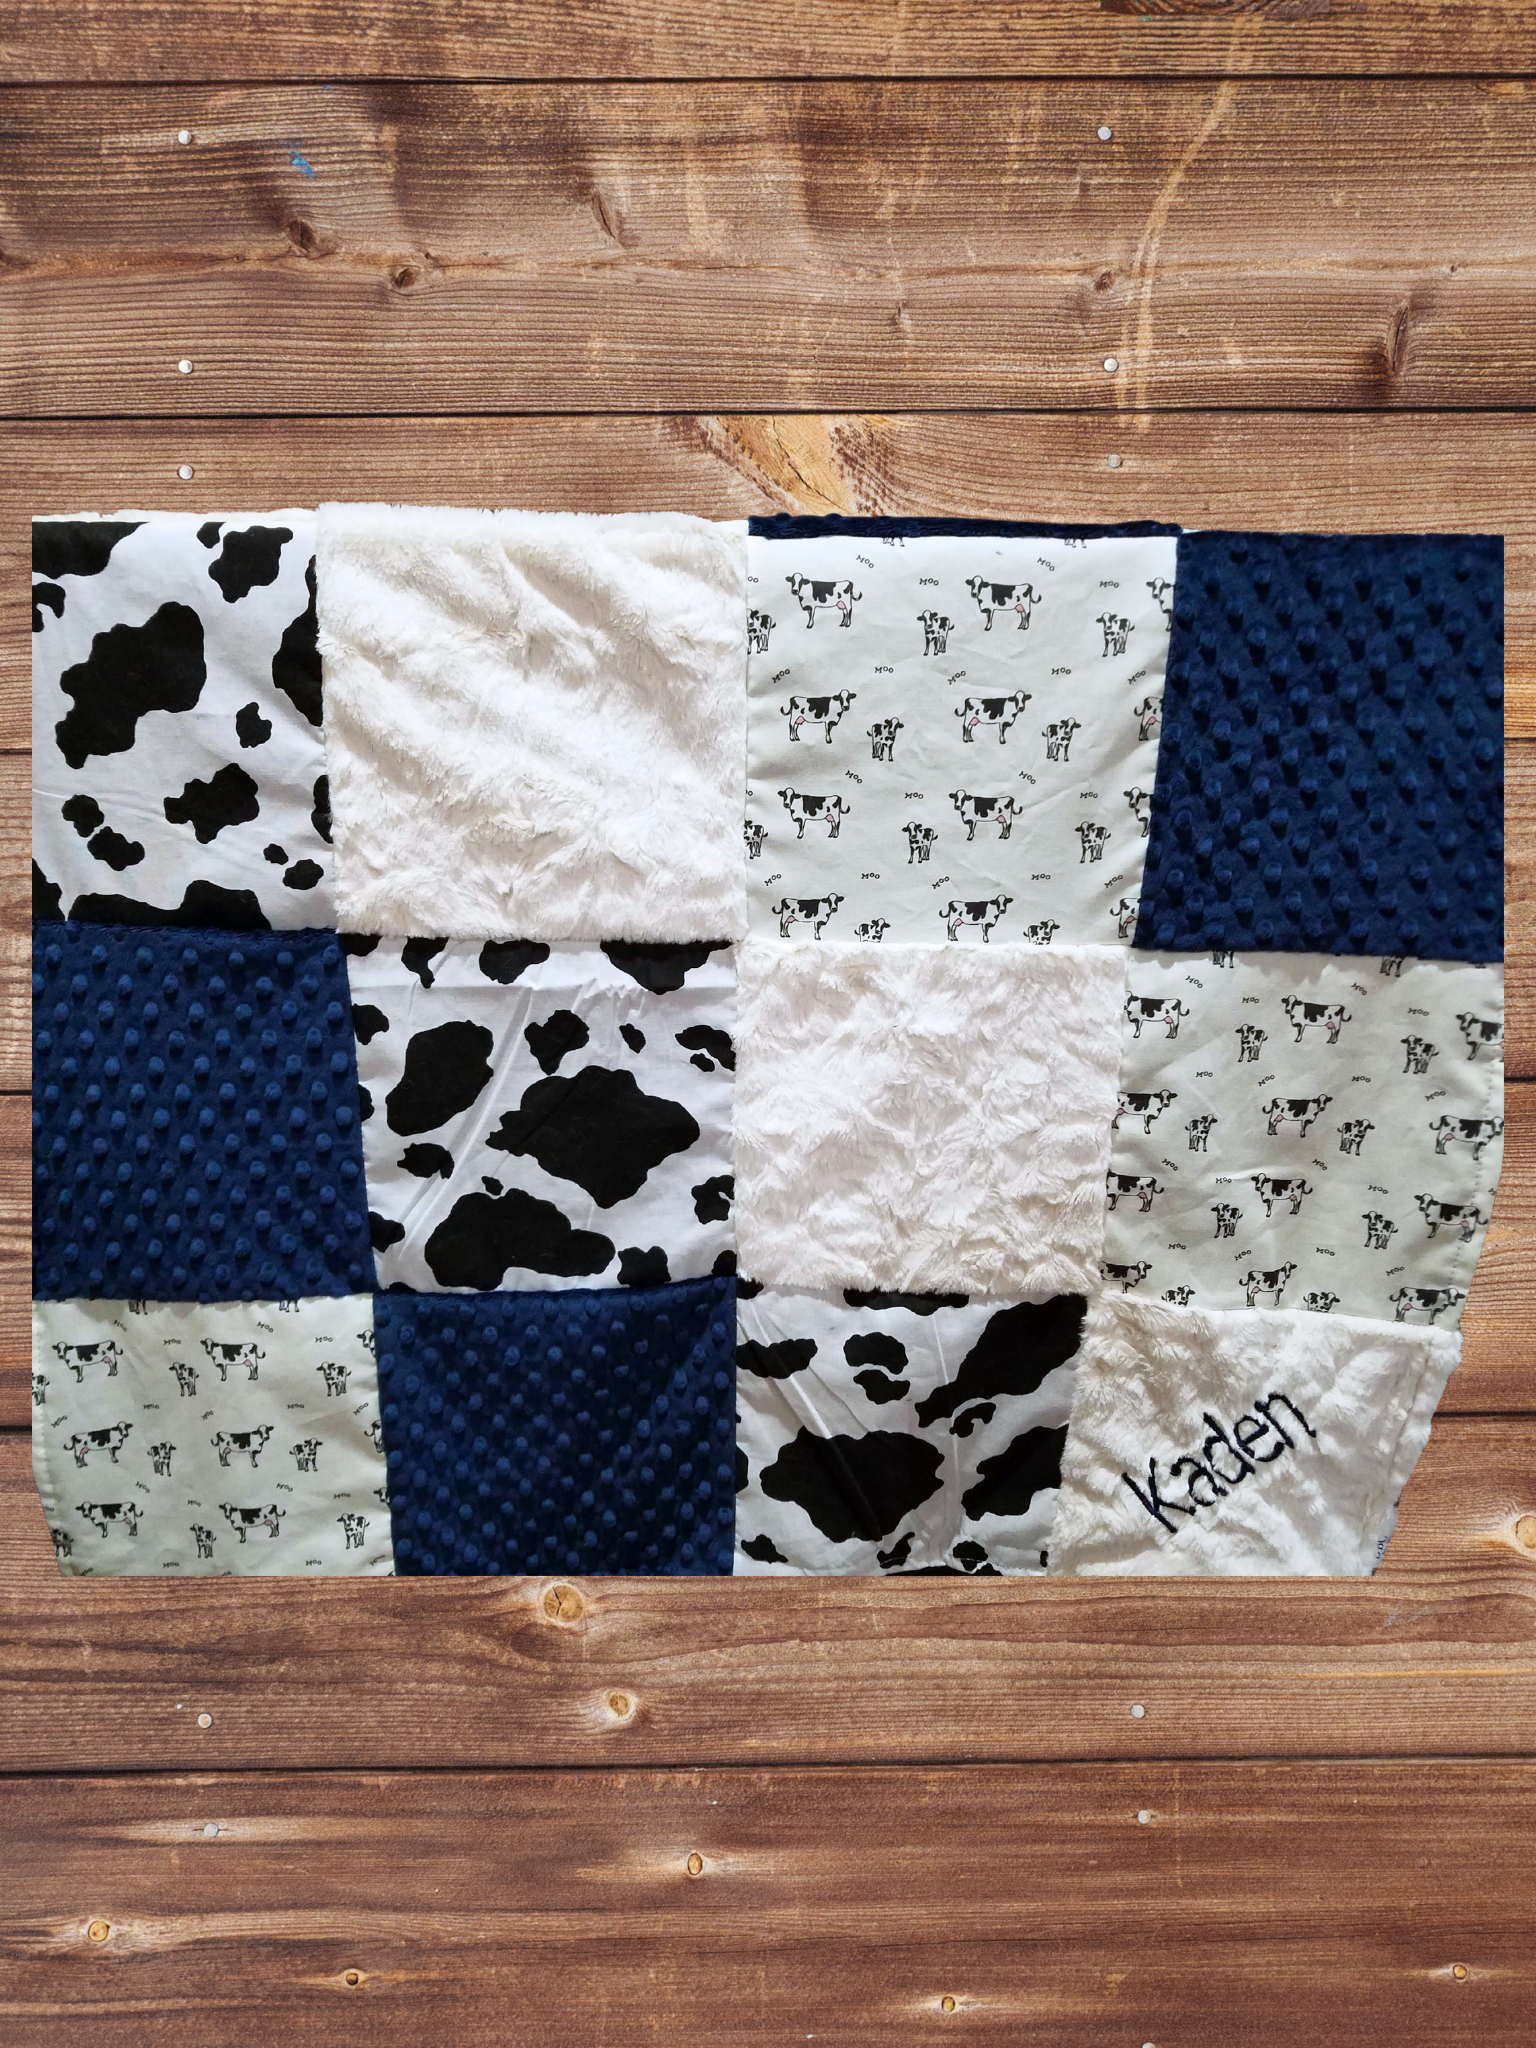 Patchwork Blanket - Cows and Black White Cow Print Farm Blanket - DBC Baby Bedding Co 